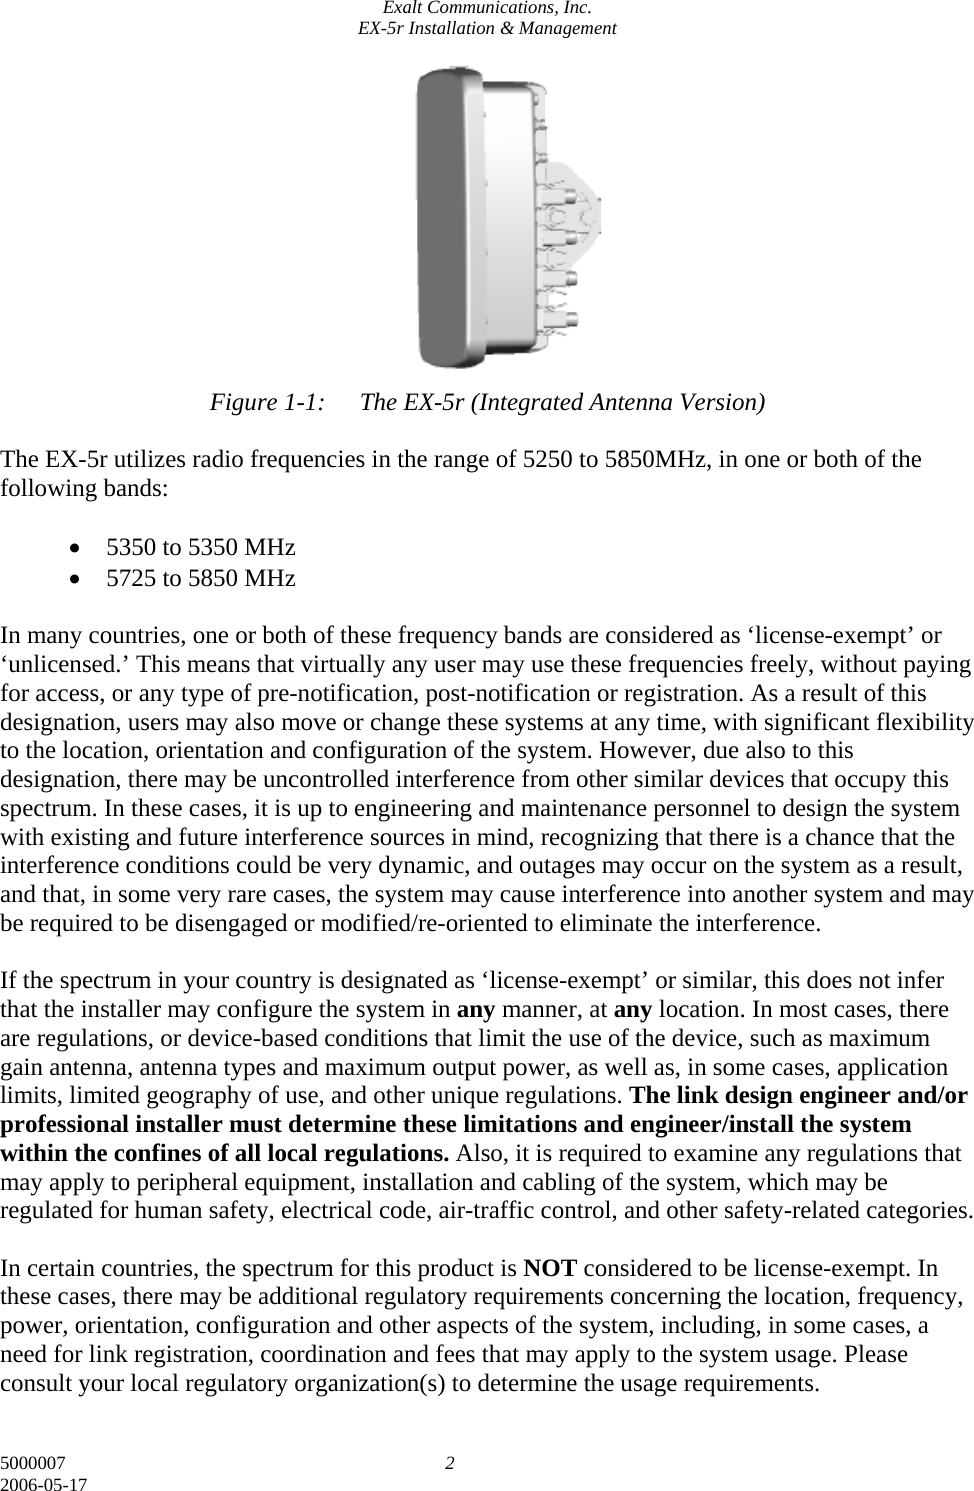 Exalt Communications, Inc. EX-5r Installation &amp; Management 5000007  2 2006-05-17            Figure 1-1:  The EX-5r (Integrated Antenna Version)  The EX-5r utilizes radio frequencies in the range of 5250 to 5850MHz, in one or both of the following bands:  • 5350 to 5350 MHz • 5725 to 5850 MHz  In many countries, one or both of these frequency bands are considered as ‘license-exempt’ or ‘unlicensed.’ This means that virtually any user may use these frequencies freely, without paying for access, or any type of pre-notification, post-notification or registration. As a result of this designation, users may also move or change these systems at any time, with significant flexibility to the location, orientation and configuration of the system. However, due also to this designation, there may be uncontrolled interference from other similar devices that occupy this spectrum. In these cases, it is up to engineering and maintenance personnel to design the system with existing and future interference sources in mind, recognizing that there is a chance that the interference conditions could be very dynamic, and outages may occur on the system as a result, and that, in some very rare cases, the system may cause interference into another system and may be required to be disengaged or modified/re-oriented to eliminate the interference.  If the spectrum in your country is designated as ‘license-exempt’ or similar, this does not infer that the installer may configure the system in any manner, at any location. In most cases, there are regulations, or device-based conditions that limit the use of the device, such as maximum gain antenna, antenna types and maximum output power, as well as, in some cases, application limits, limited geography of use, and other unique regulations. The link design engineer and/or professional installer must determine these limitations and engineer/install the system within the confines of all local regulations. Also, it is required to examine any regulations that may apply to peripheral equipment, installation and cabling of the system, which may be regulated for human safety, electrical code, air-traffic control, and other safety-related categories.  In certain countries, the spectrum for this product is NOT considered to be license-exempt. In these cases, there may be additional regulatory requirements concerning the location, frequency, power, orientation, configuration and other aspects of the system, including, in some cases, a need for link registration, coordination and fees that may apply to the system usage. Please consult your local regulatory organization(s) to determine the usage requirements. 